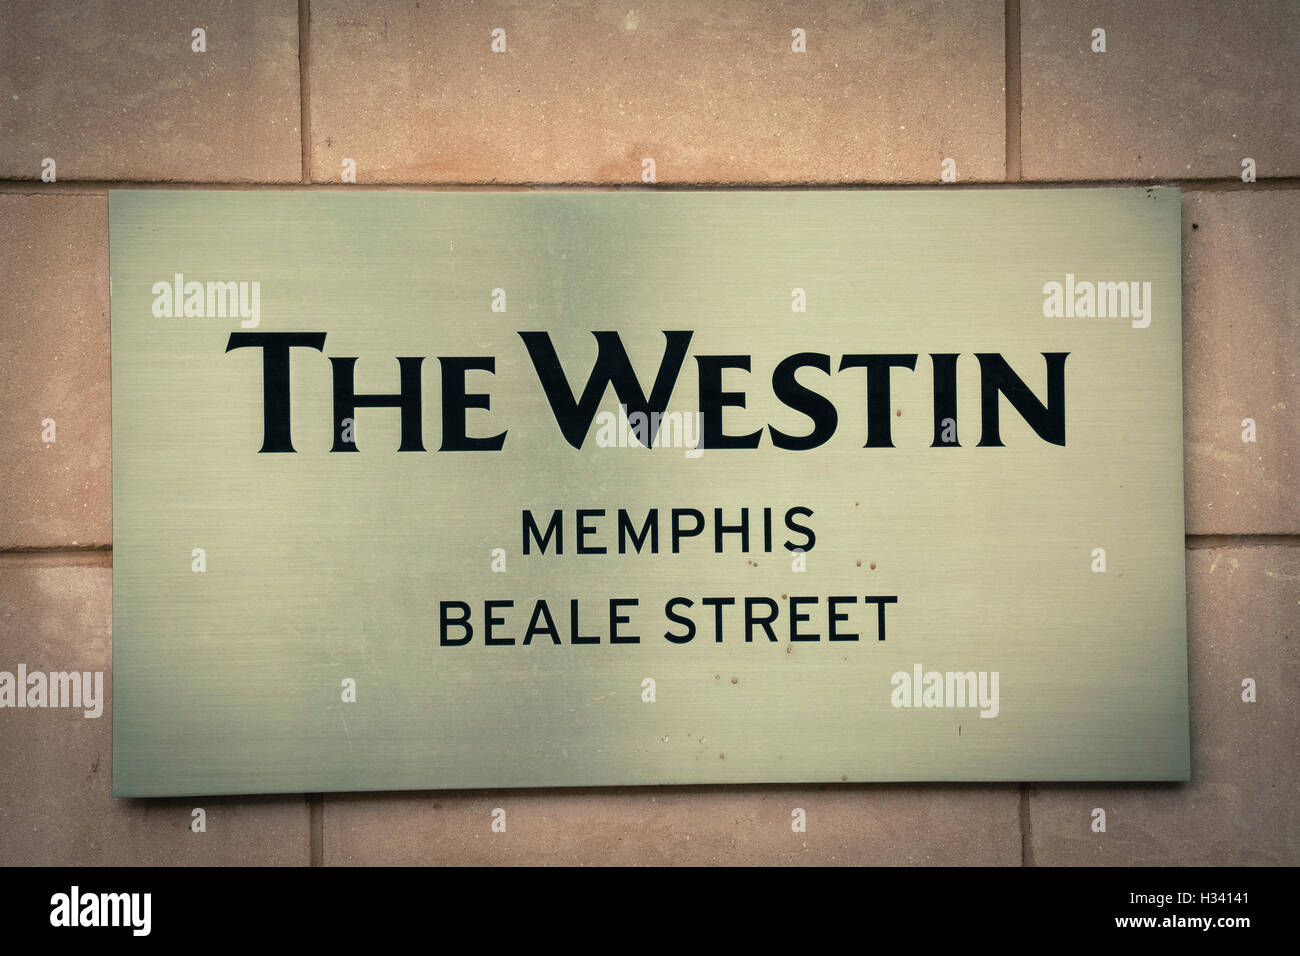 The iconic and luxurious Westin Hotel's sign on stone building on Beale Street in Memphis TN Stock Photo